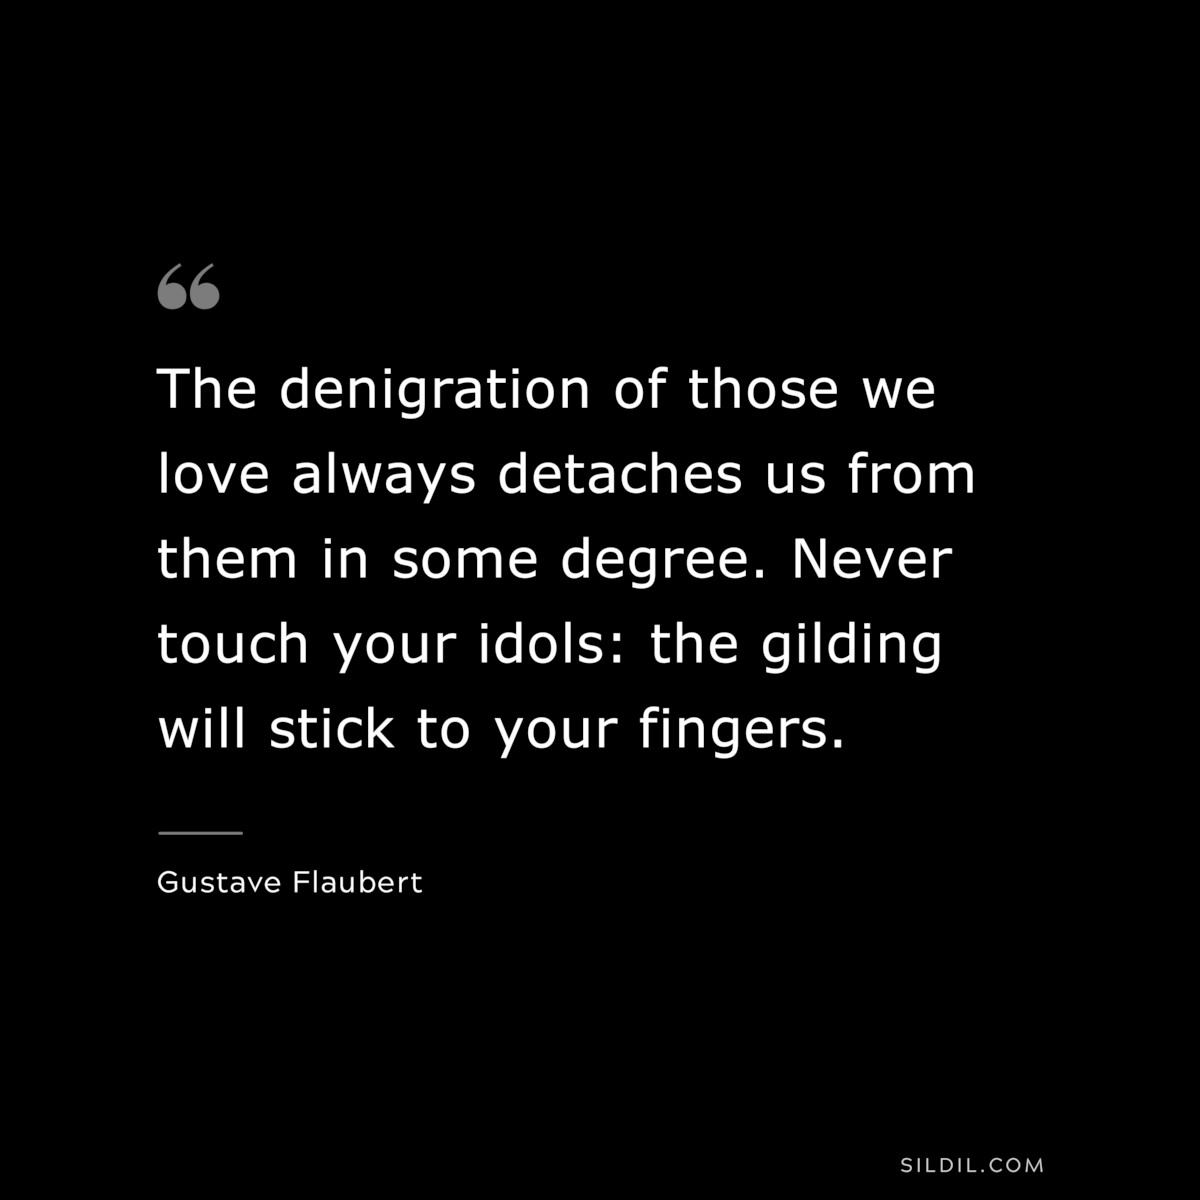 The denigration of those we love always detaches us from them in some degree. Never touch your idols: the gilding will stick to your fingers. ― Gustave Flaubert